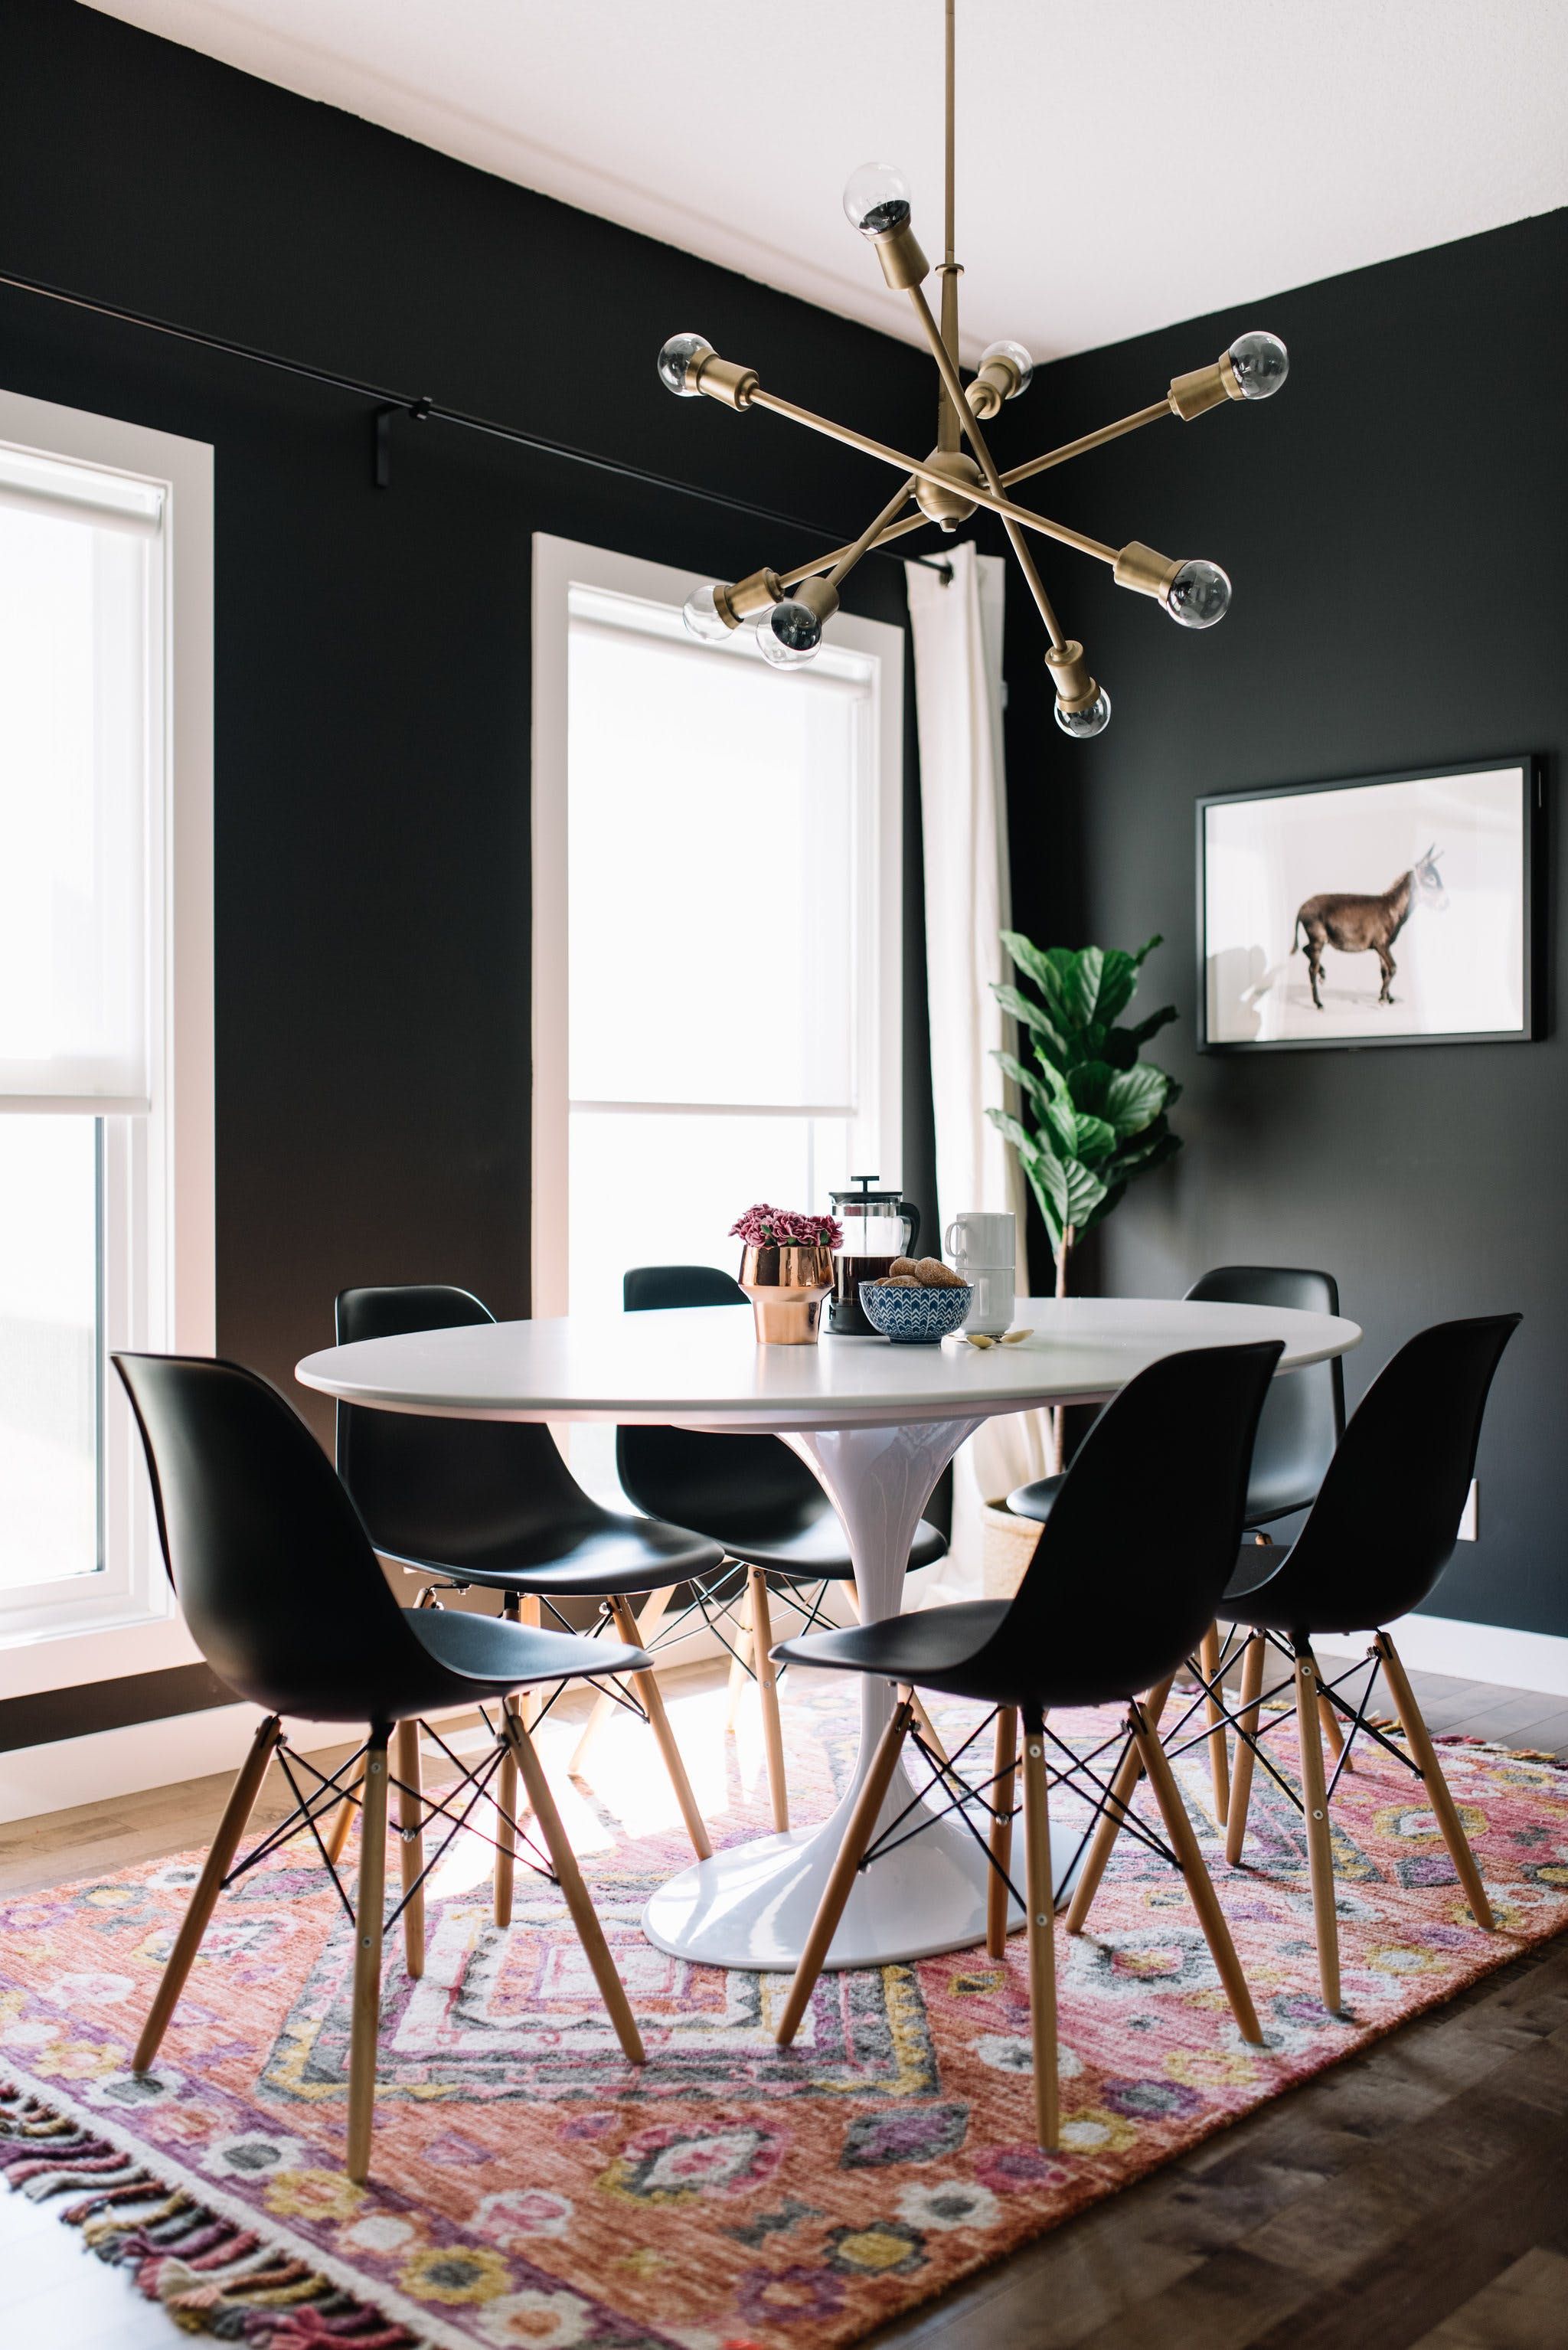 Get Ready for Easter Brunch W These Mid-Century Dining Tables_2 mid-century dining table Get Ready for Easter Brunch W/ These Mid-Century Dining Tables Get Ready for Easter Brunch W These Mid Century Dining Tables 6